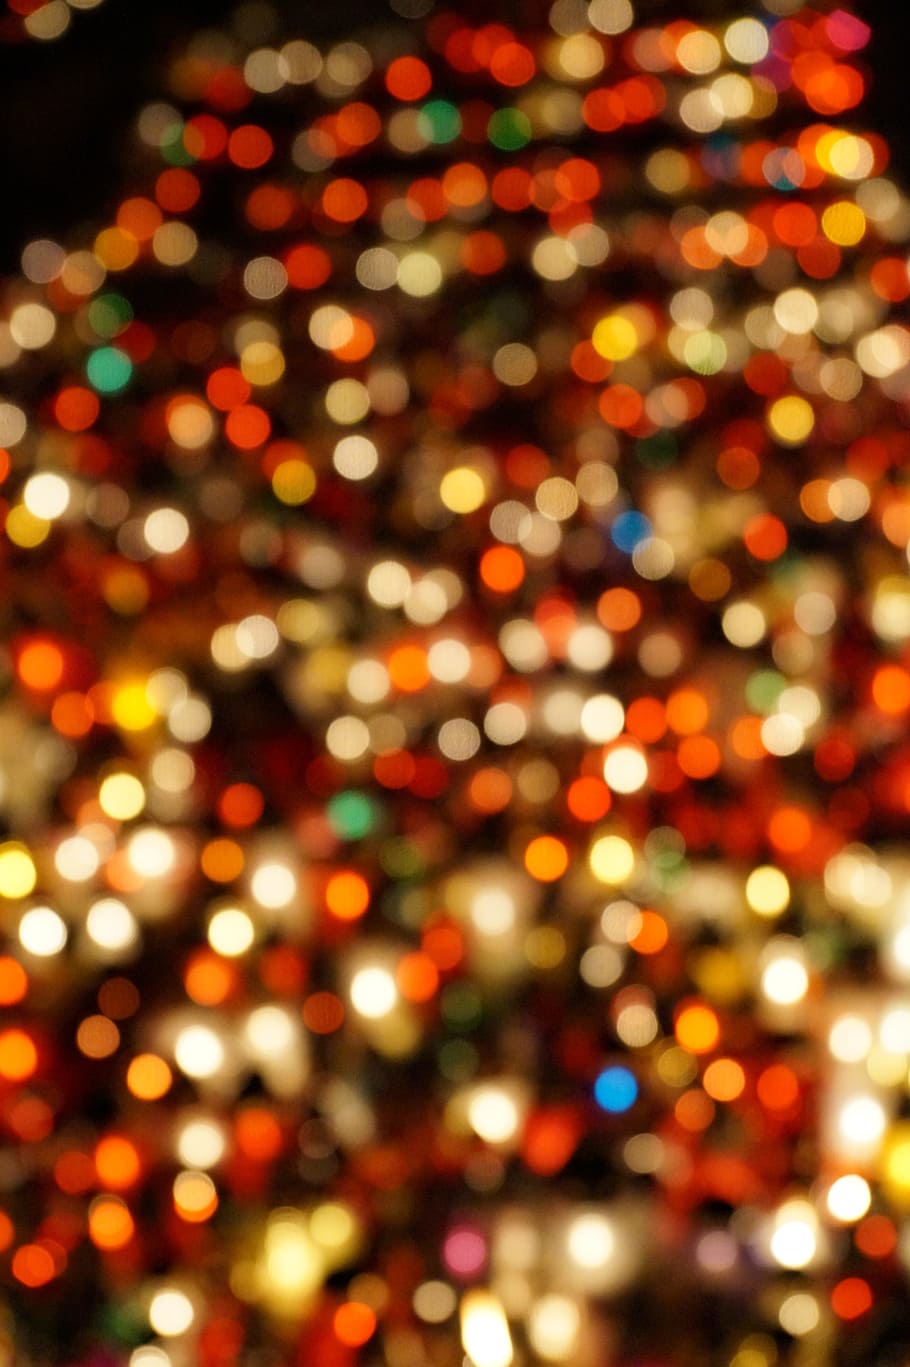 bokeh photography, Blur, Lights, Candles, All Saints Day, abstraction, light, candle, flame, fire